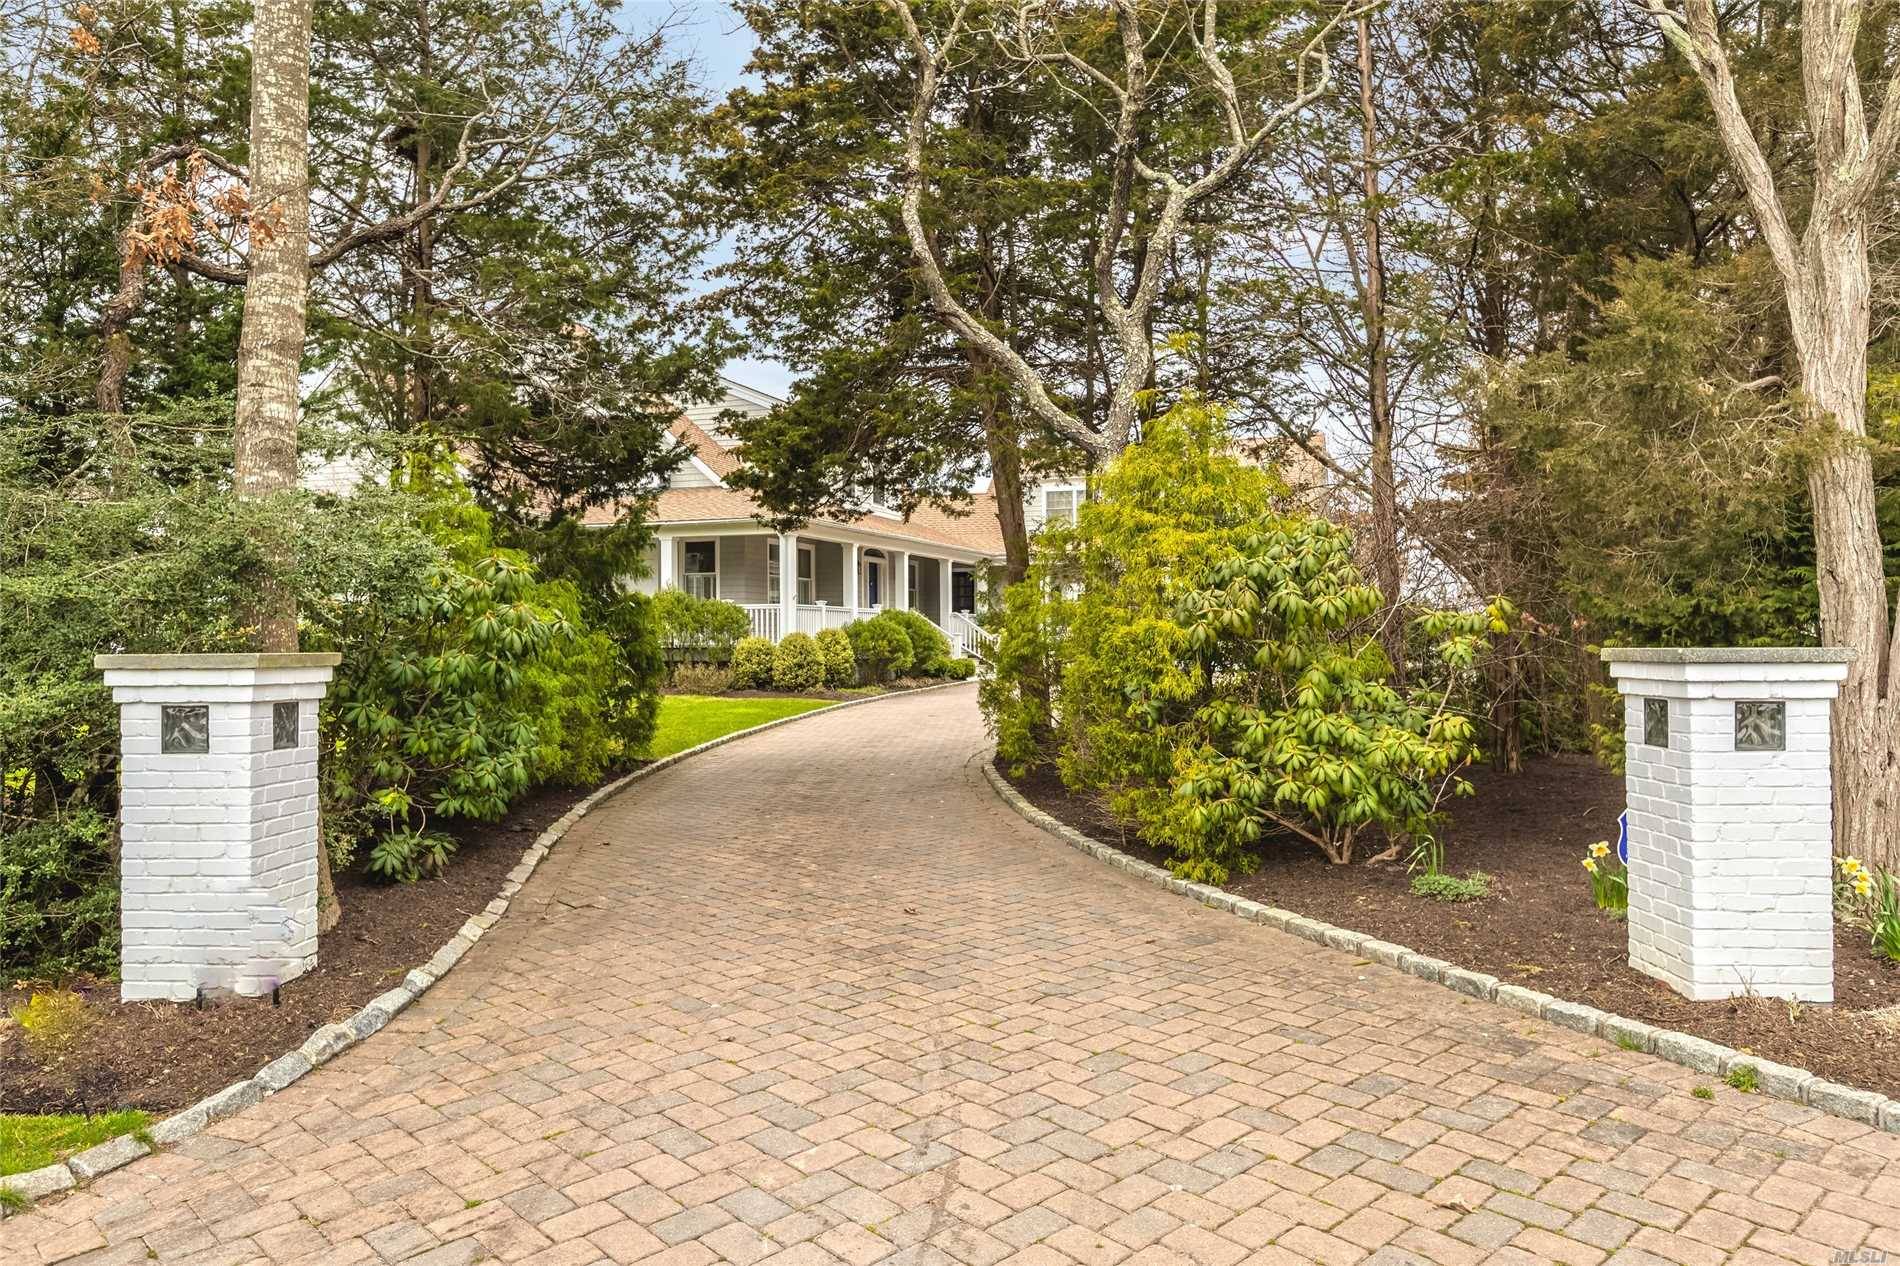 Southampton Township Village of Quogue Estate Section 5, 000 Sq Ft Beauty on 3.